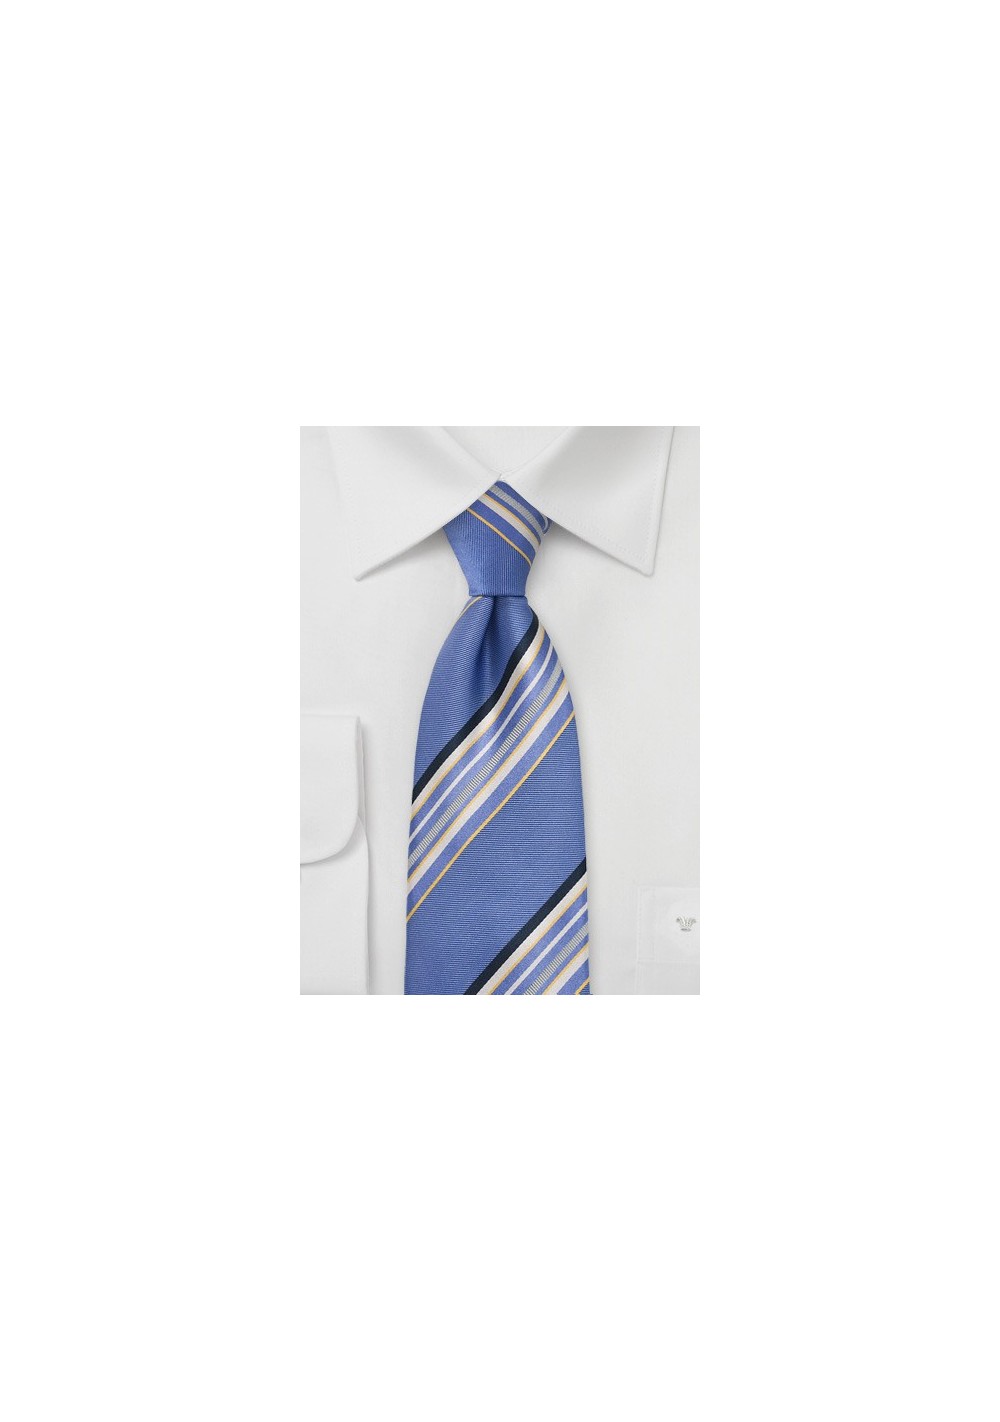 Vibrant Striped Tie in Periwinkle Blue